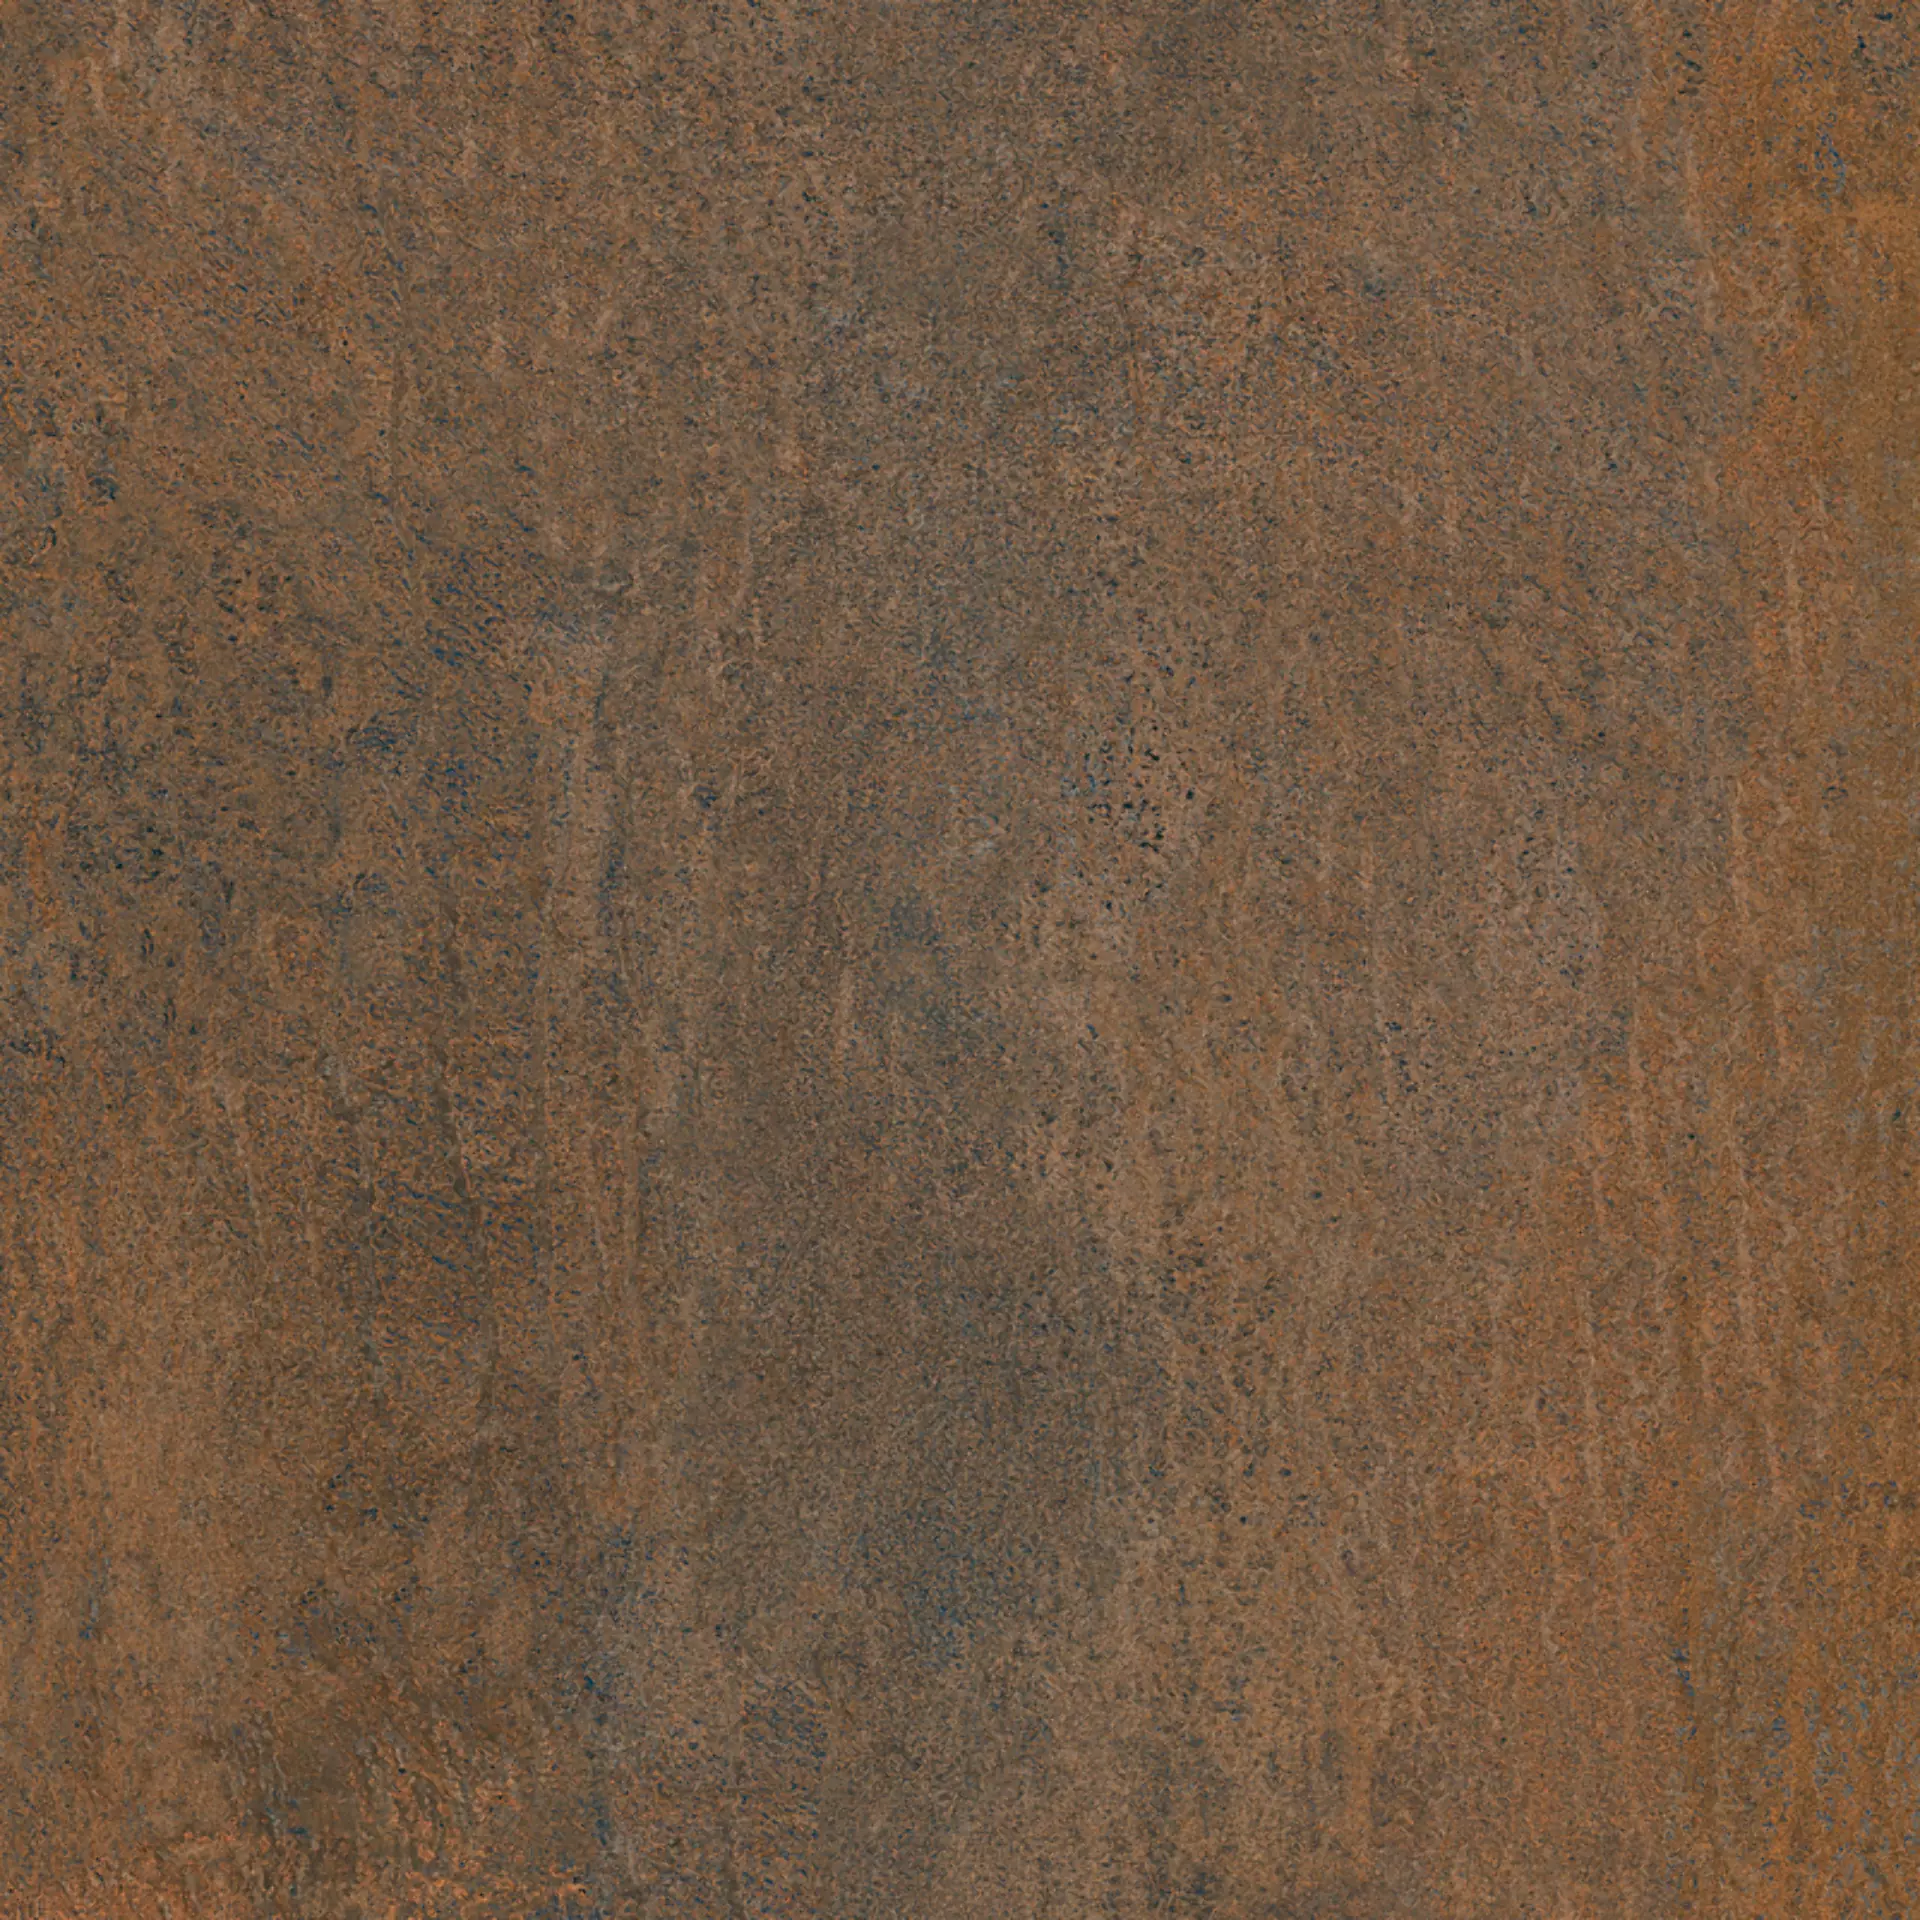 Sant Agostino Oxidart Copper Natural CSAOXCOP90 90x90cm rectified 10mm